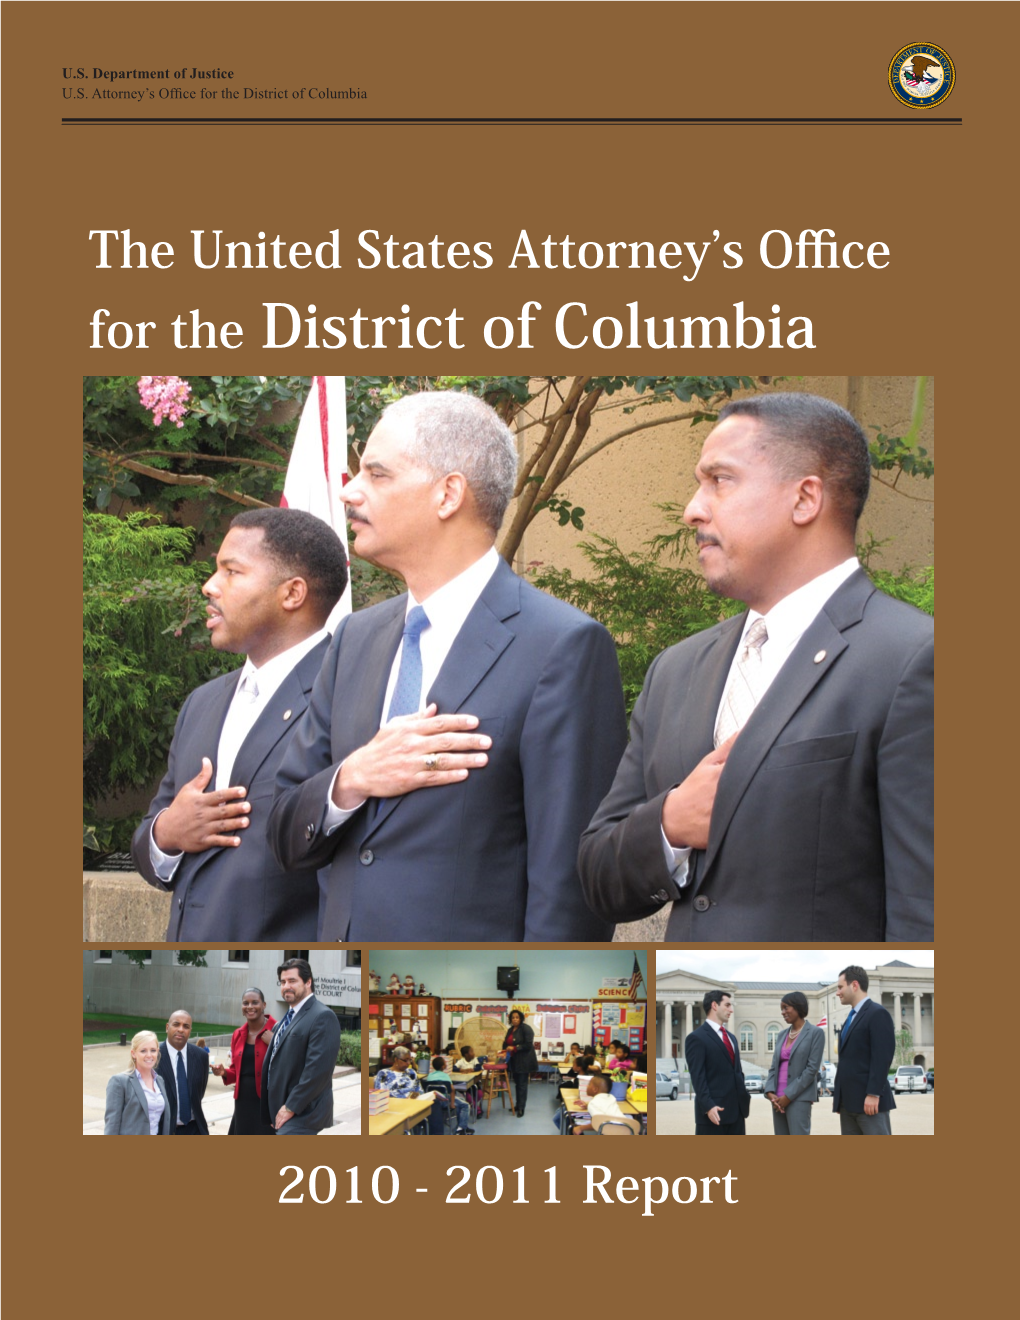 The United States Attorney's Office for the District of Columbia